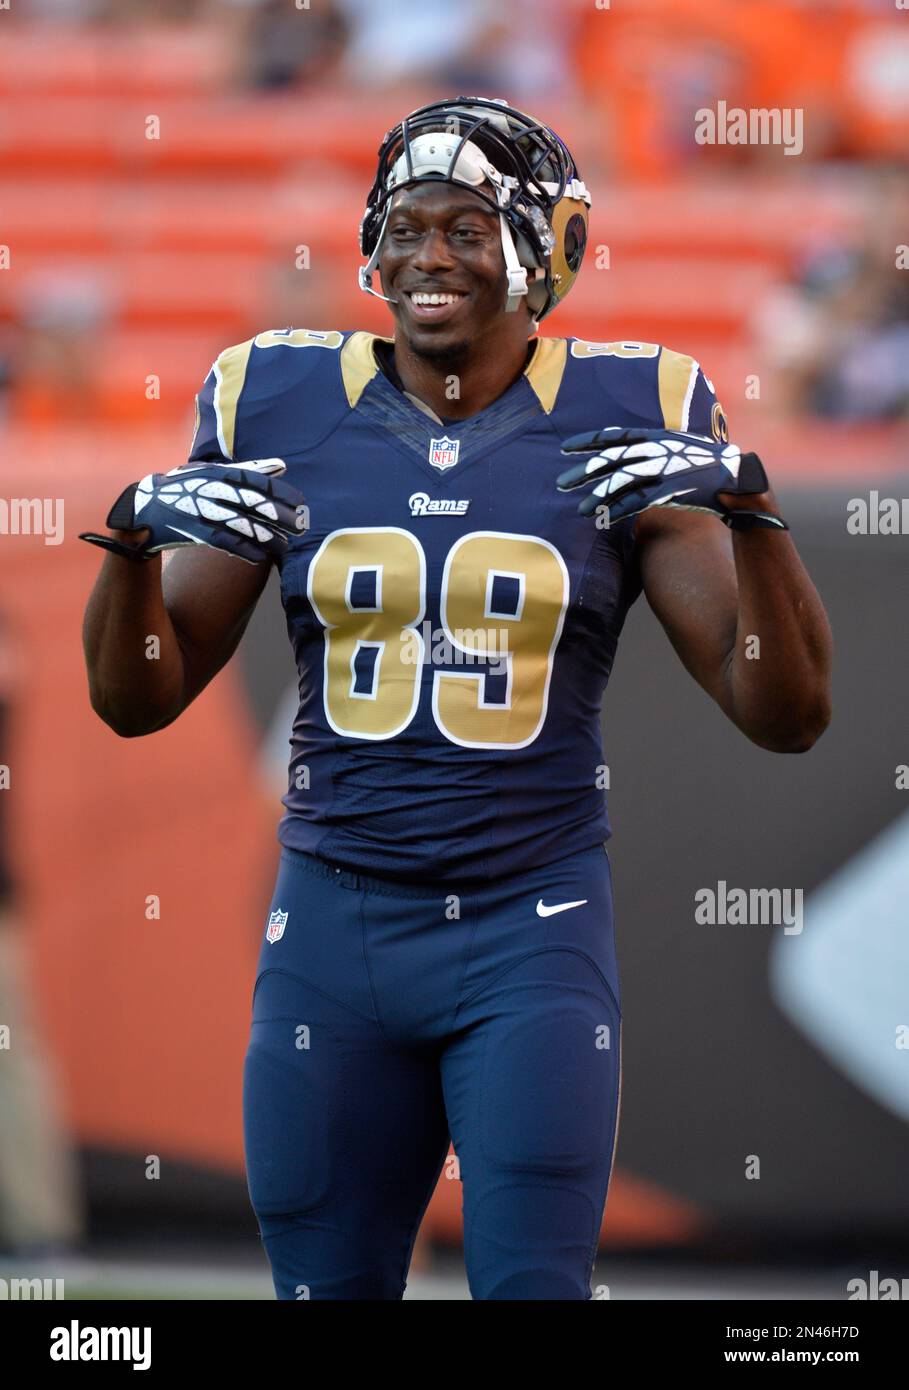 St. Louis Rams tight end Jared Cook (89) walks on the field prior to a  preseason NFL football game against the Cleveland Browns Saturday, August  23, in Cleveland. St. Louis won 33-14. (